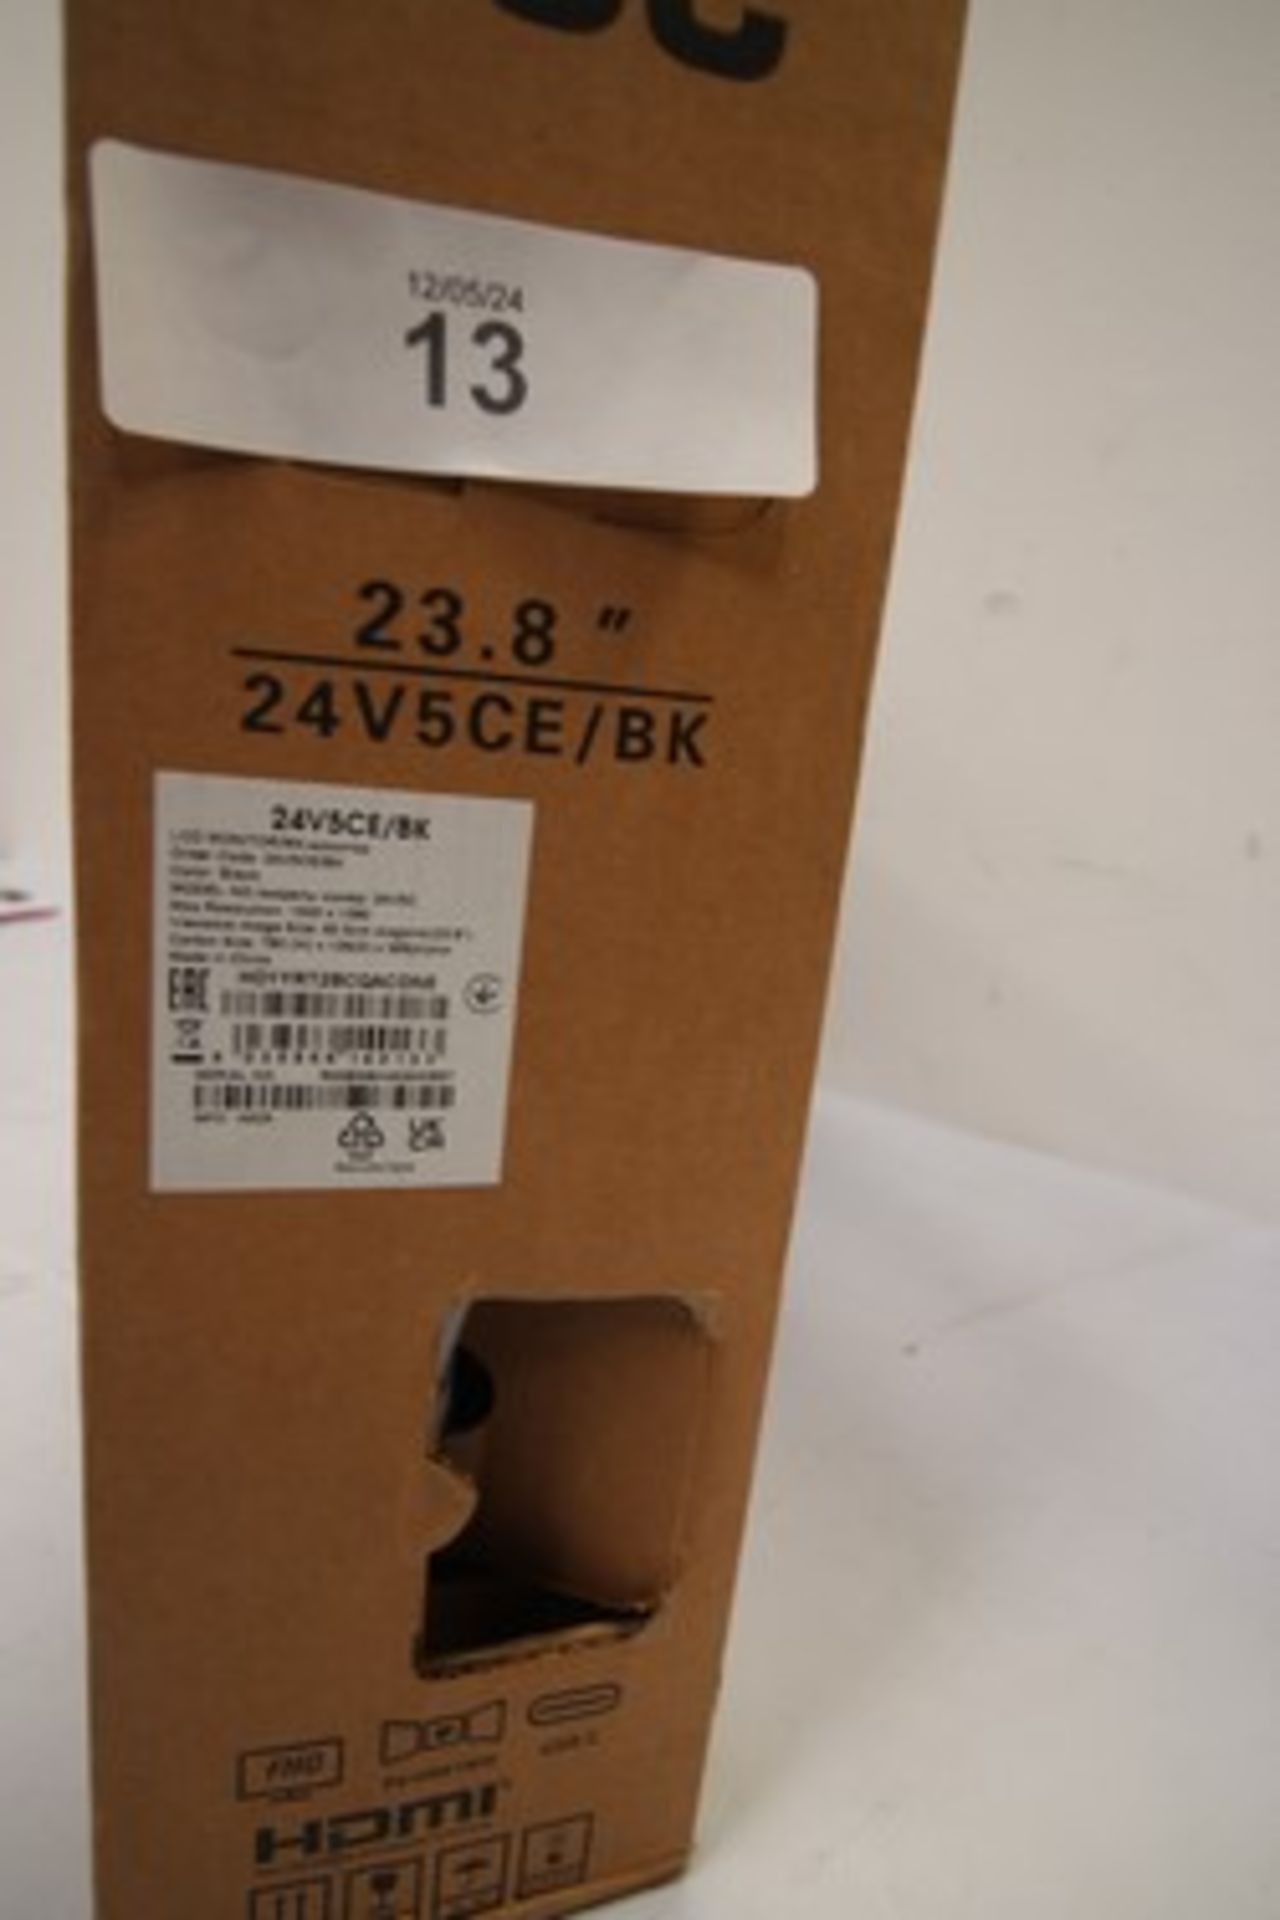 1 x AOC 23.8" wide screen monitor, model No: 24V5CE/BK - new in box (ES3 cage) - Image 4 of 4